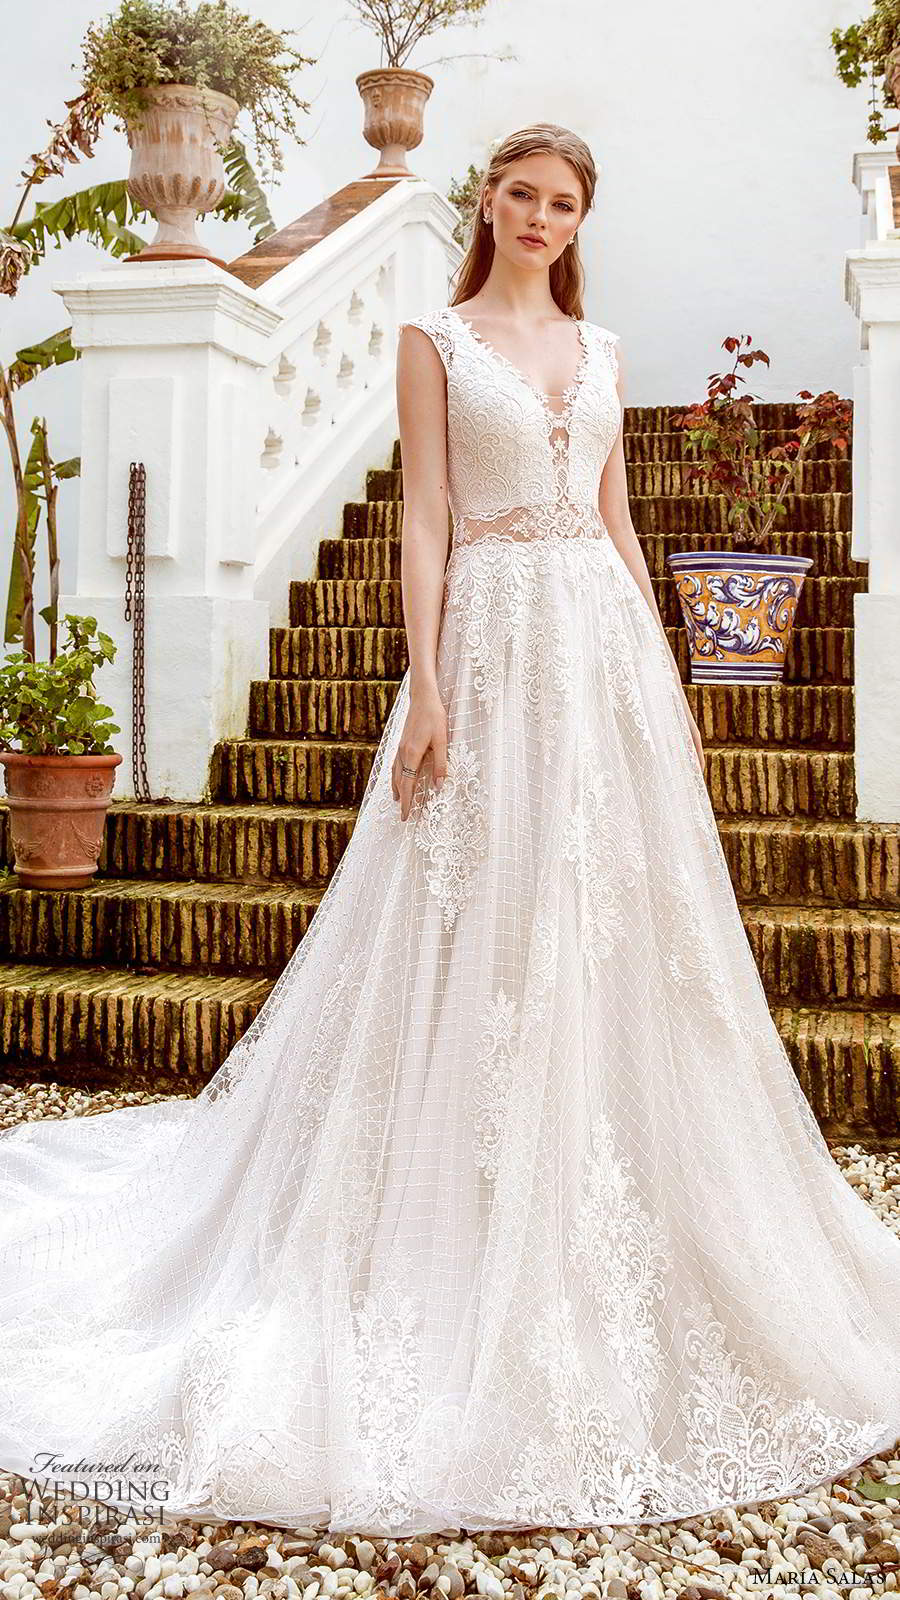 maria salas 2019 bridal cap sleeves thick straps plunging v neckline fully embellished a line ball gown wedding dress chapel train (17) mv